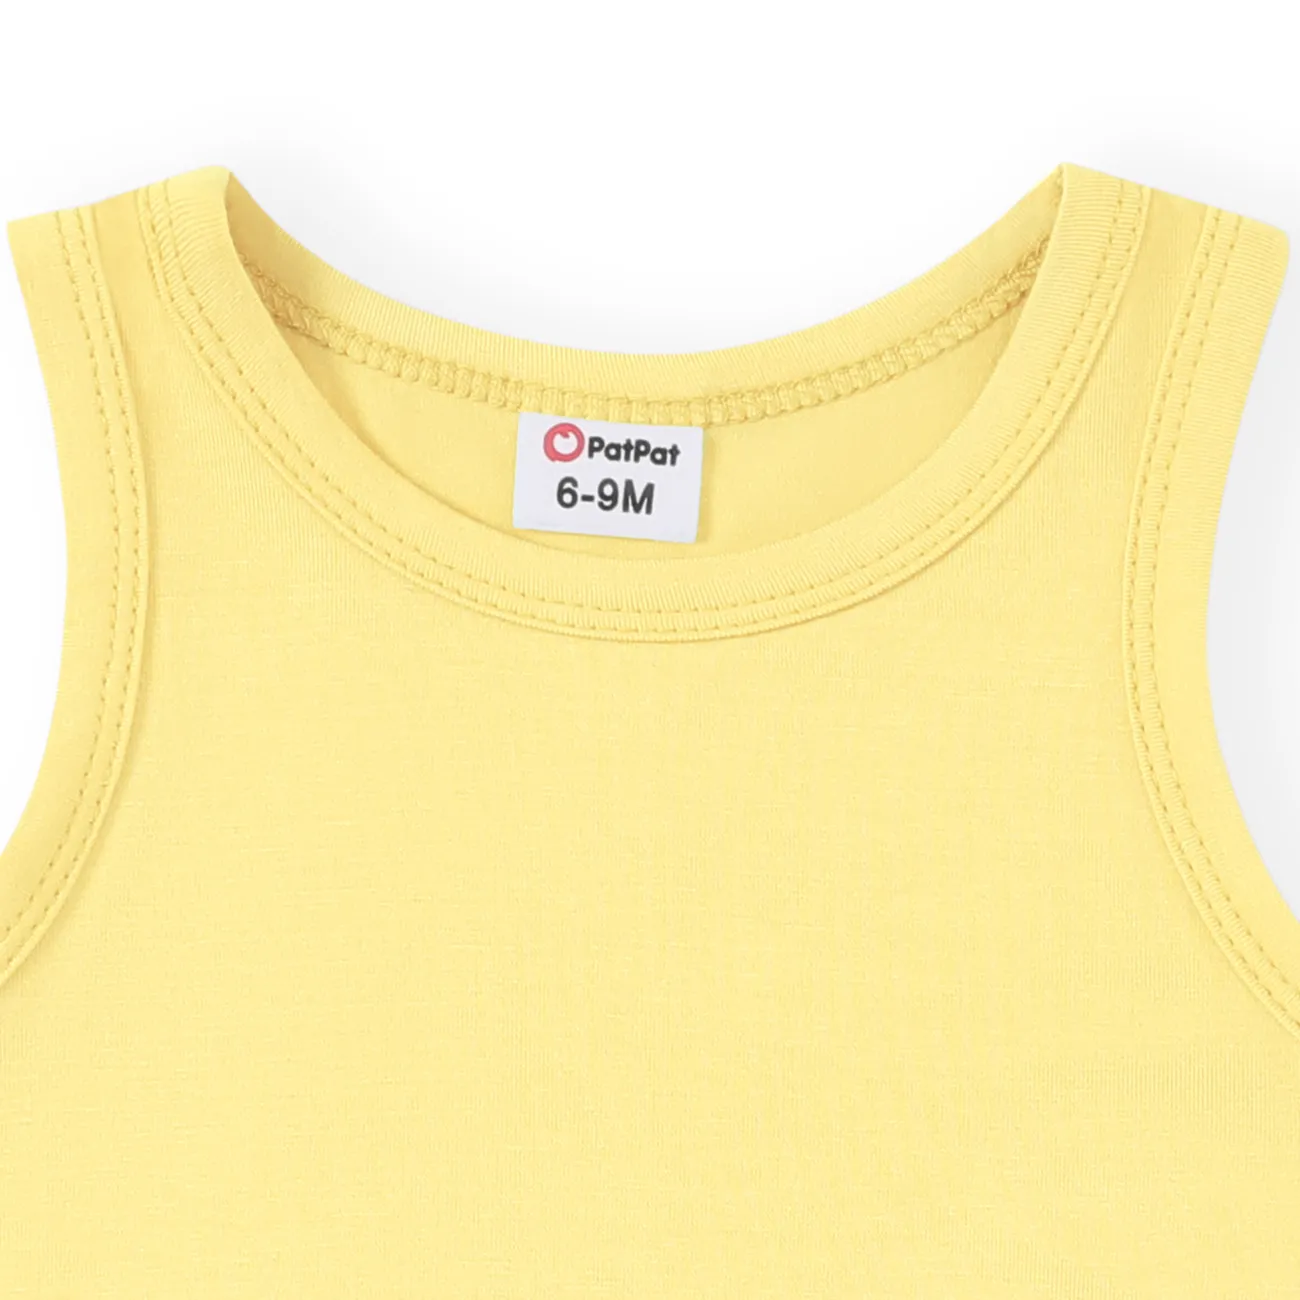  Baby Boy/Girl Solid Color Comfortable 95% Modal Fabric Bodysuits  Pale Yellow big image 1